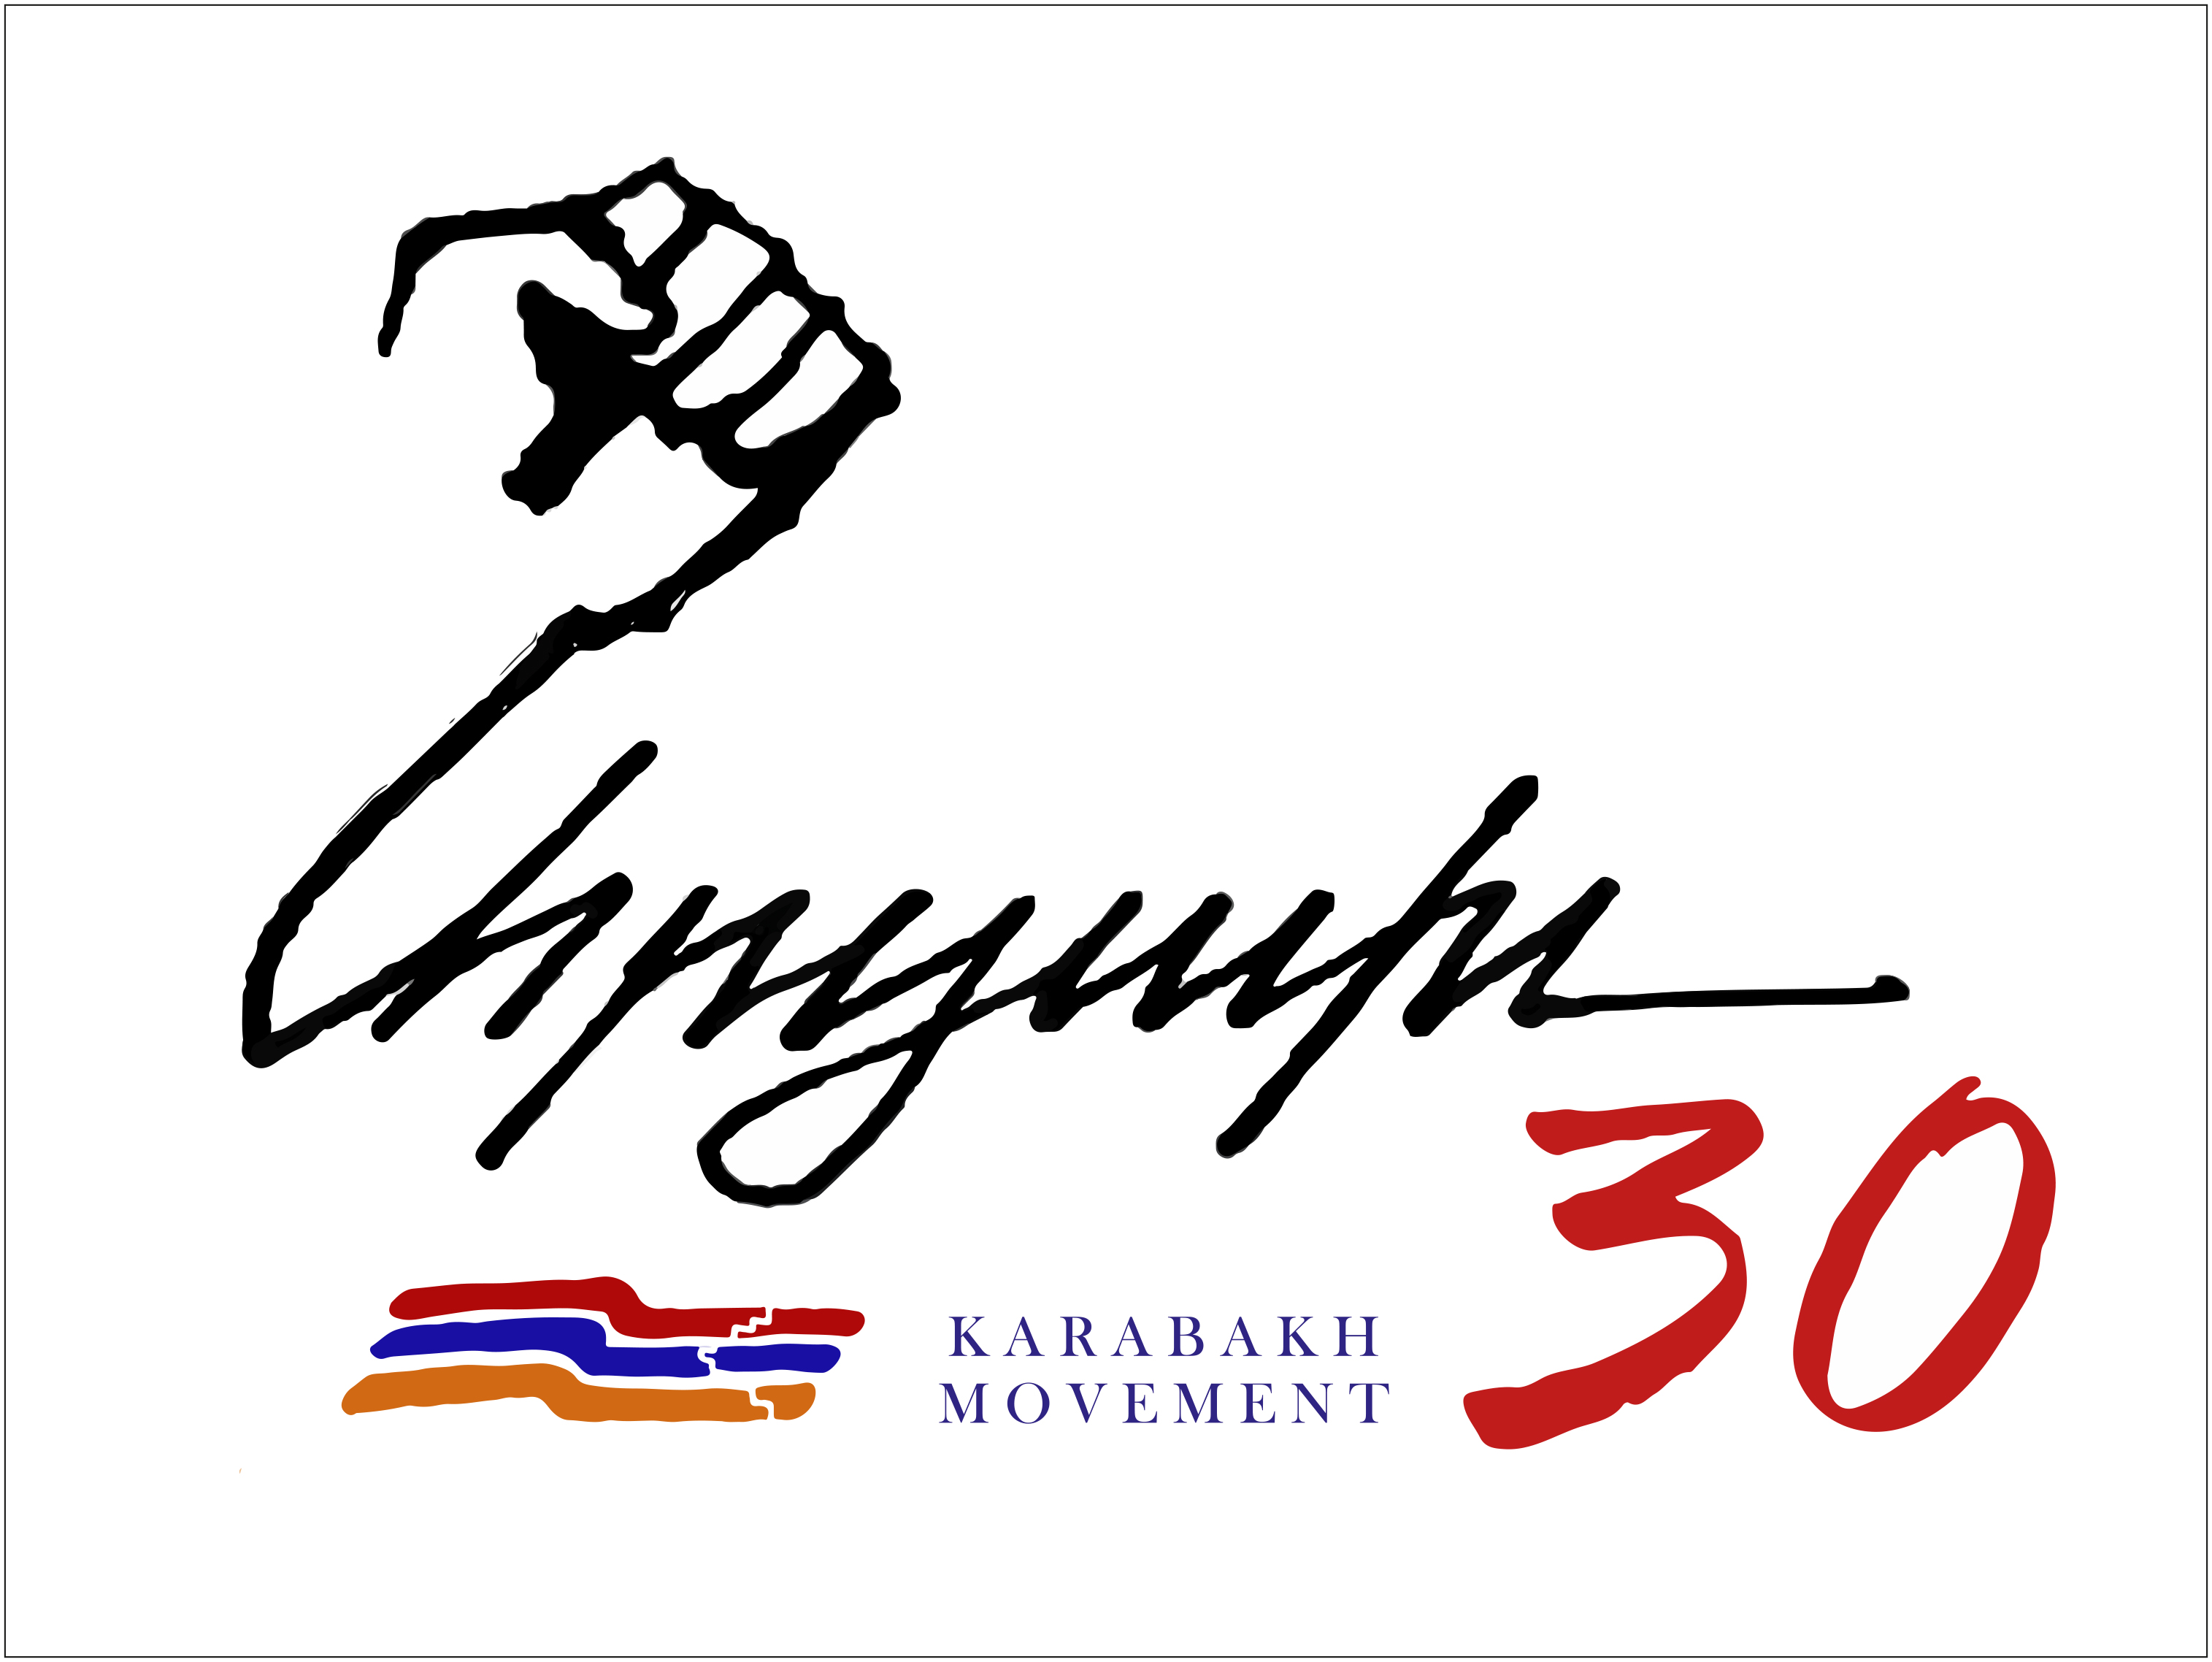 Event Dedicated to the 30th Anniversary of the Karabakh Movement Held in Beirut